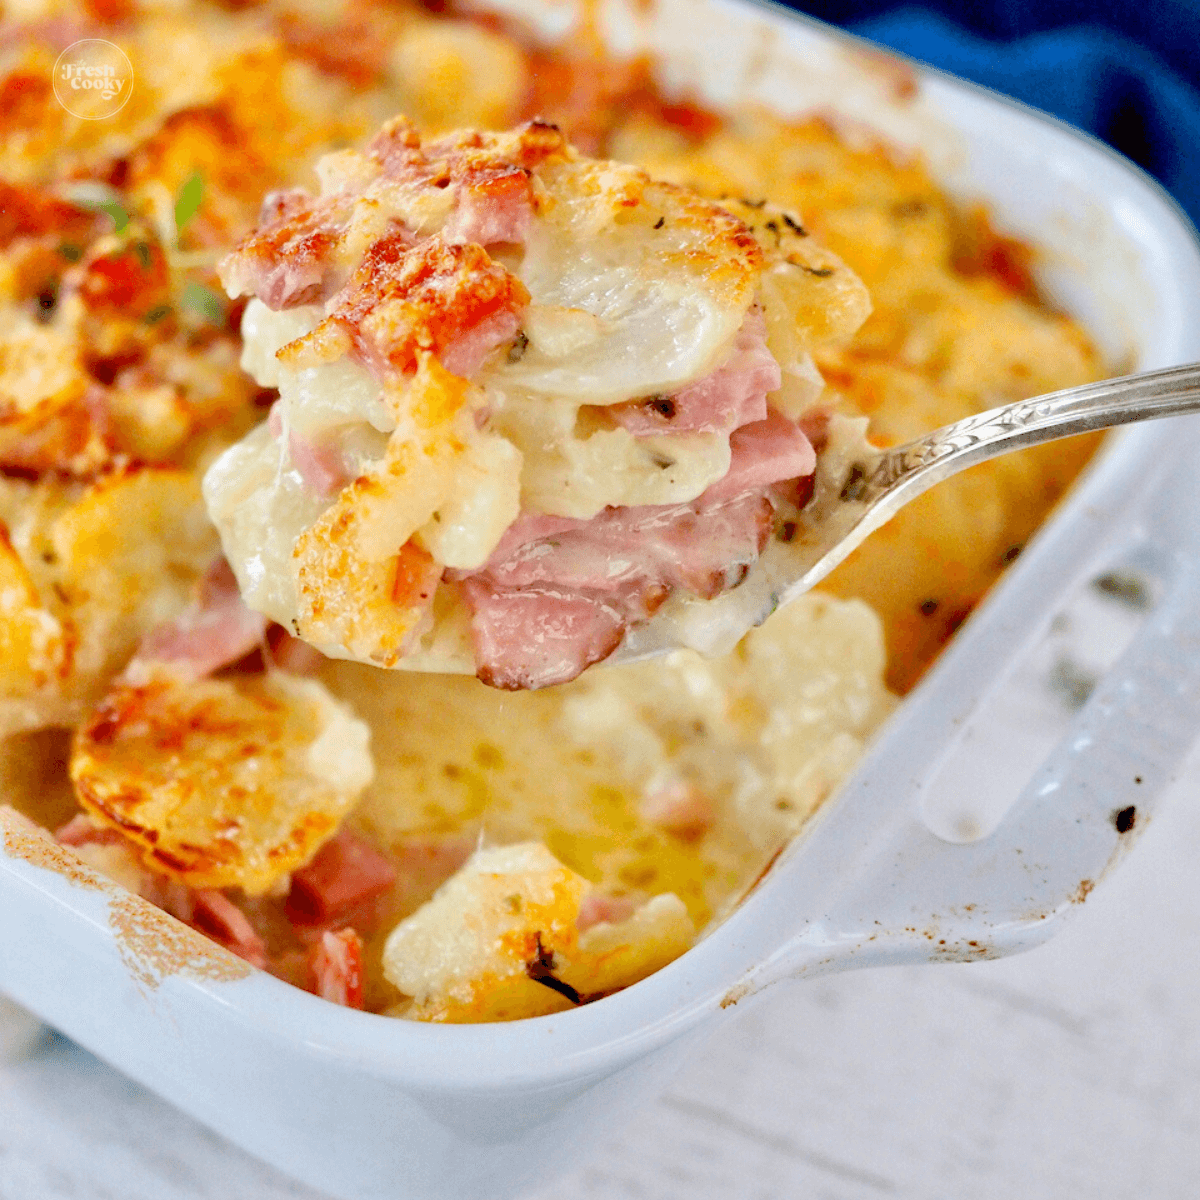 https://www.thefreshcooky.com/wp-content/uploads/2022/04/IP-Scalloped-Potatoes-with-Ham-Square-2.png